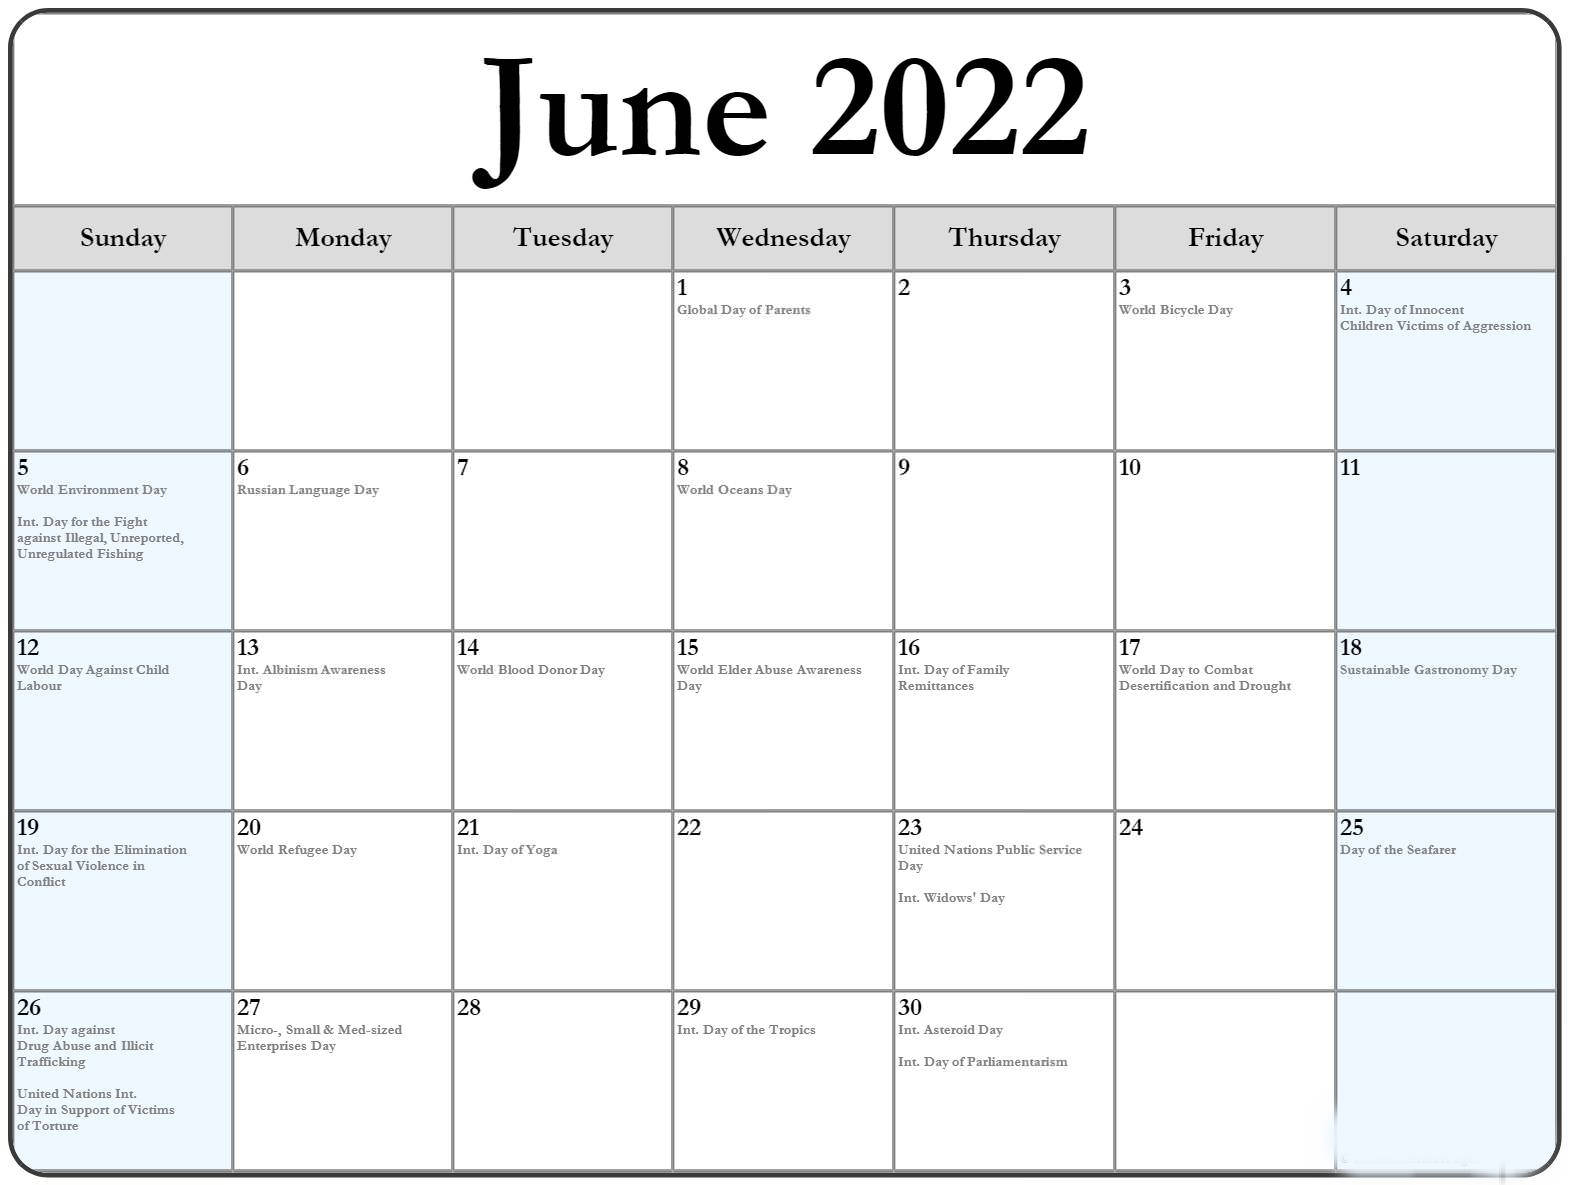 June 2021 Calendar With Holidays And Events Wallpaper